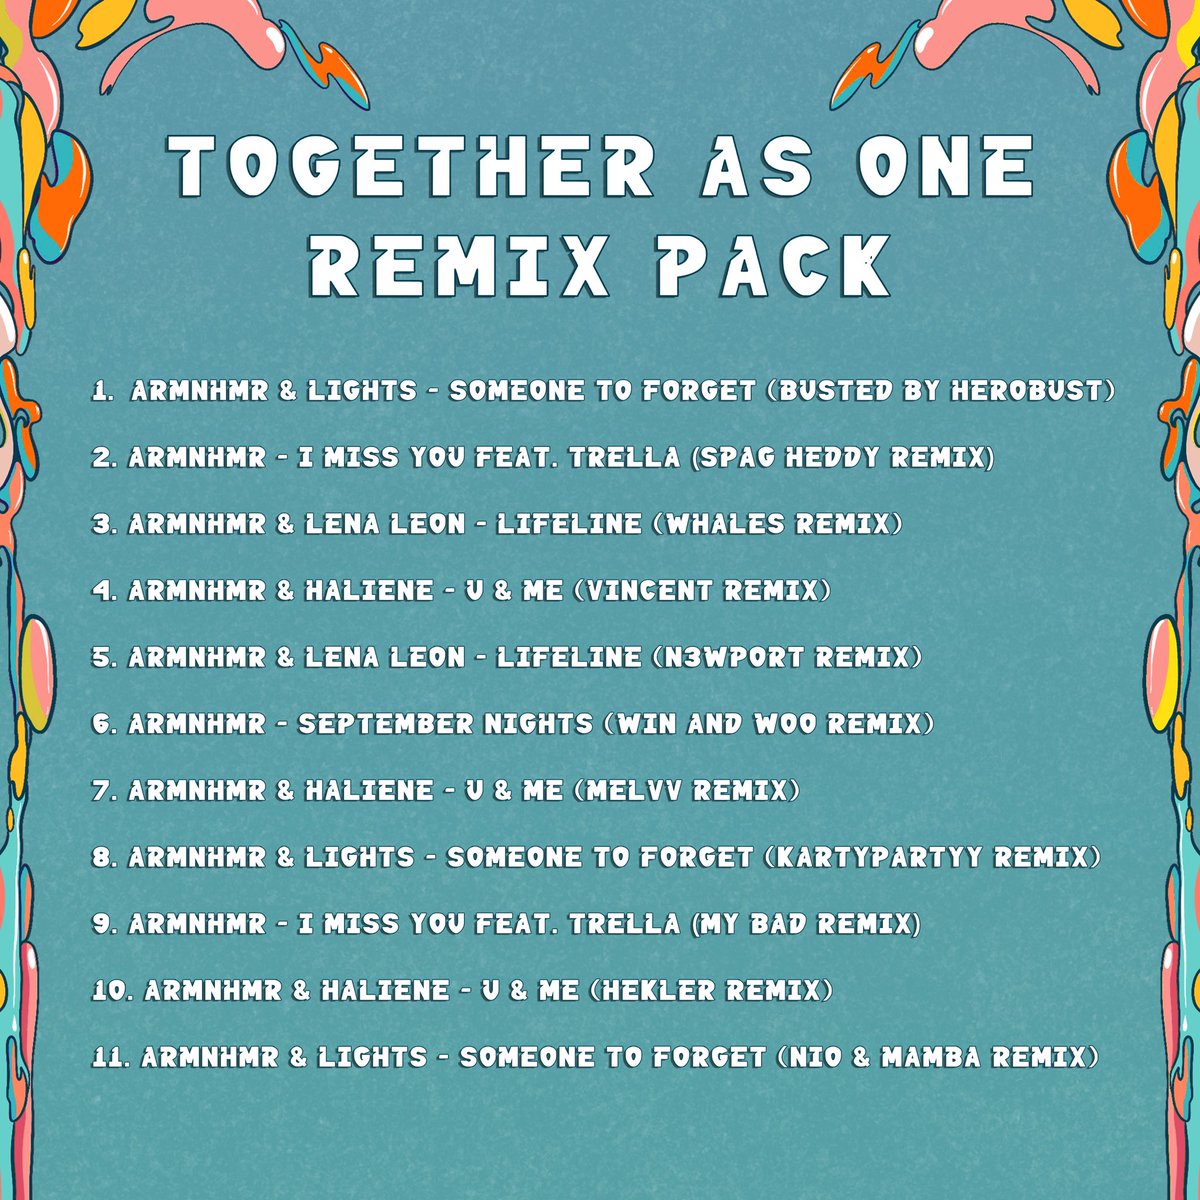 Our album Together As One holds a very special place with many of us. On Monday 4/22 we’ll be releasing 11 remixes from 11 amazing artists. We’ve been putting this together for over half a year and cant wait to finally share it. Pre-save: monster.cat/togetherasoner…